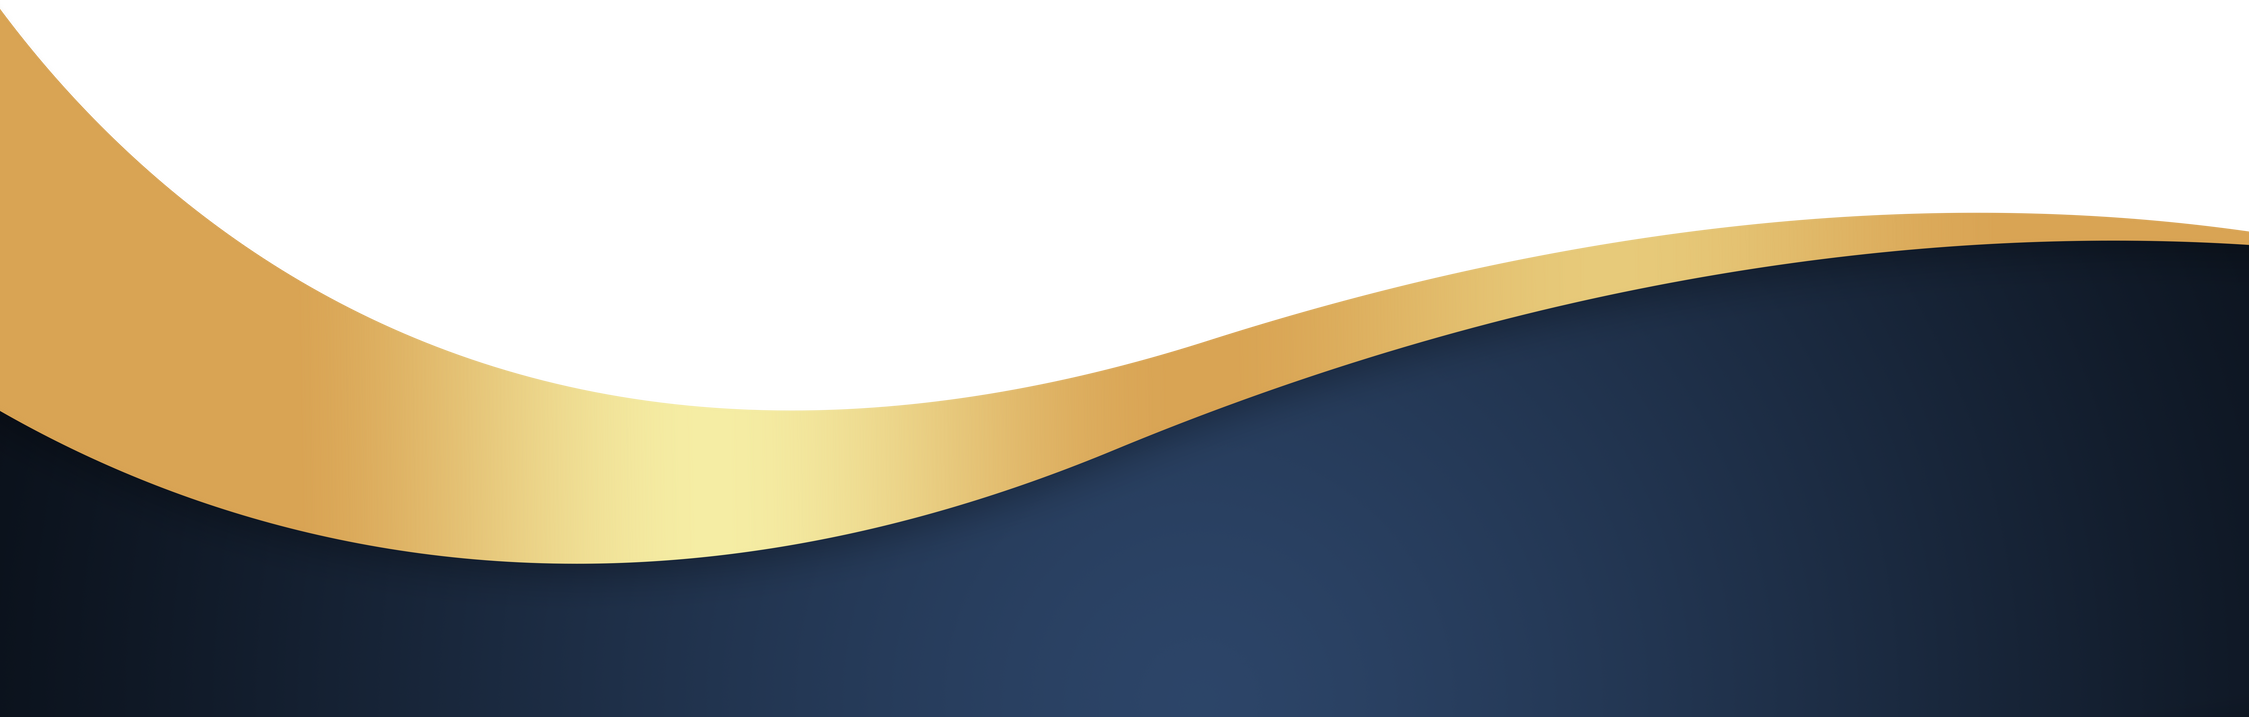 Navy and Gold Wavy Banner. Curved header and footer.